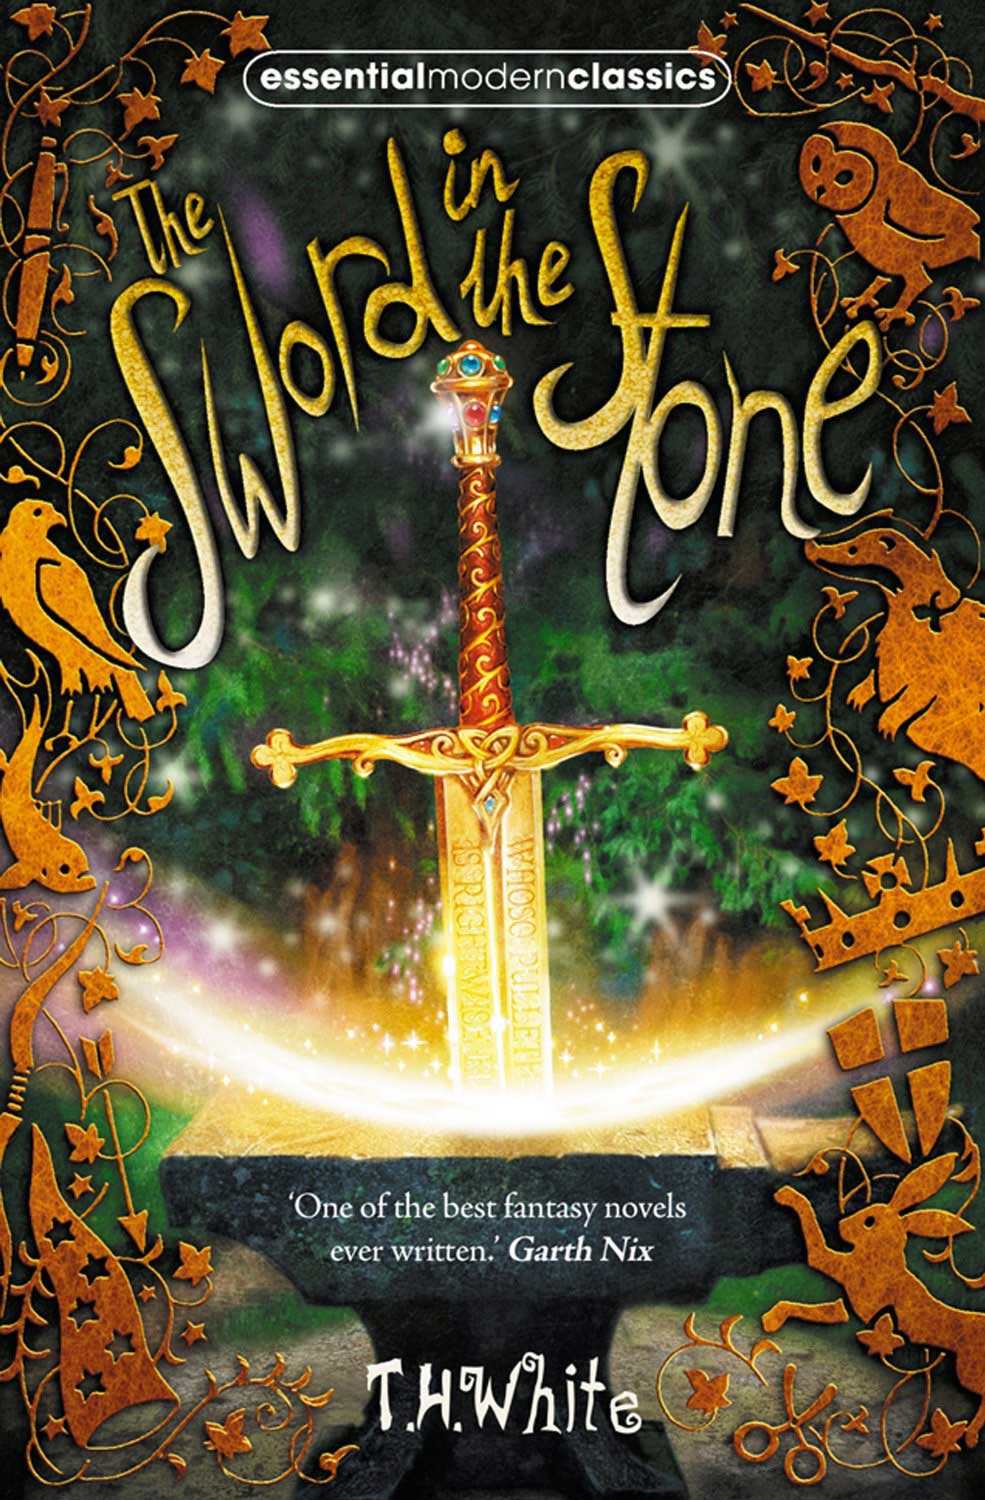 The Sword in the Stone (The Once and Future King series), by T.H. White. 
                              
                              
                              
                              White gives the untold story of the legendary King Arthur’s childhood and his training under the wizard Merlyn in this 1938 classic.
                              
                              
                              
                              Buy now: The Sword in the Stone (The Once and Future King series)